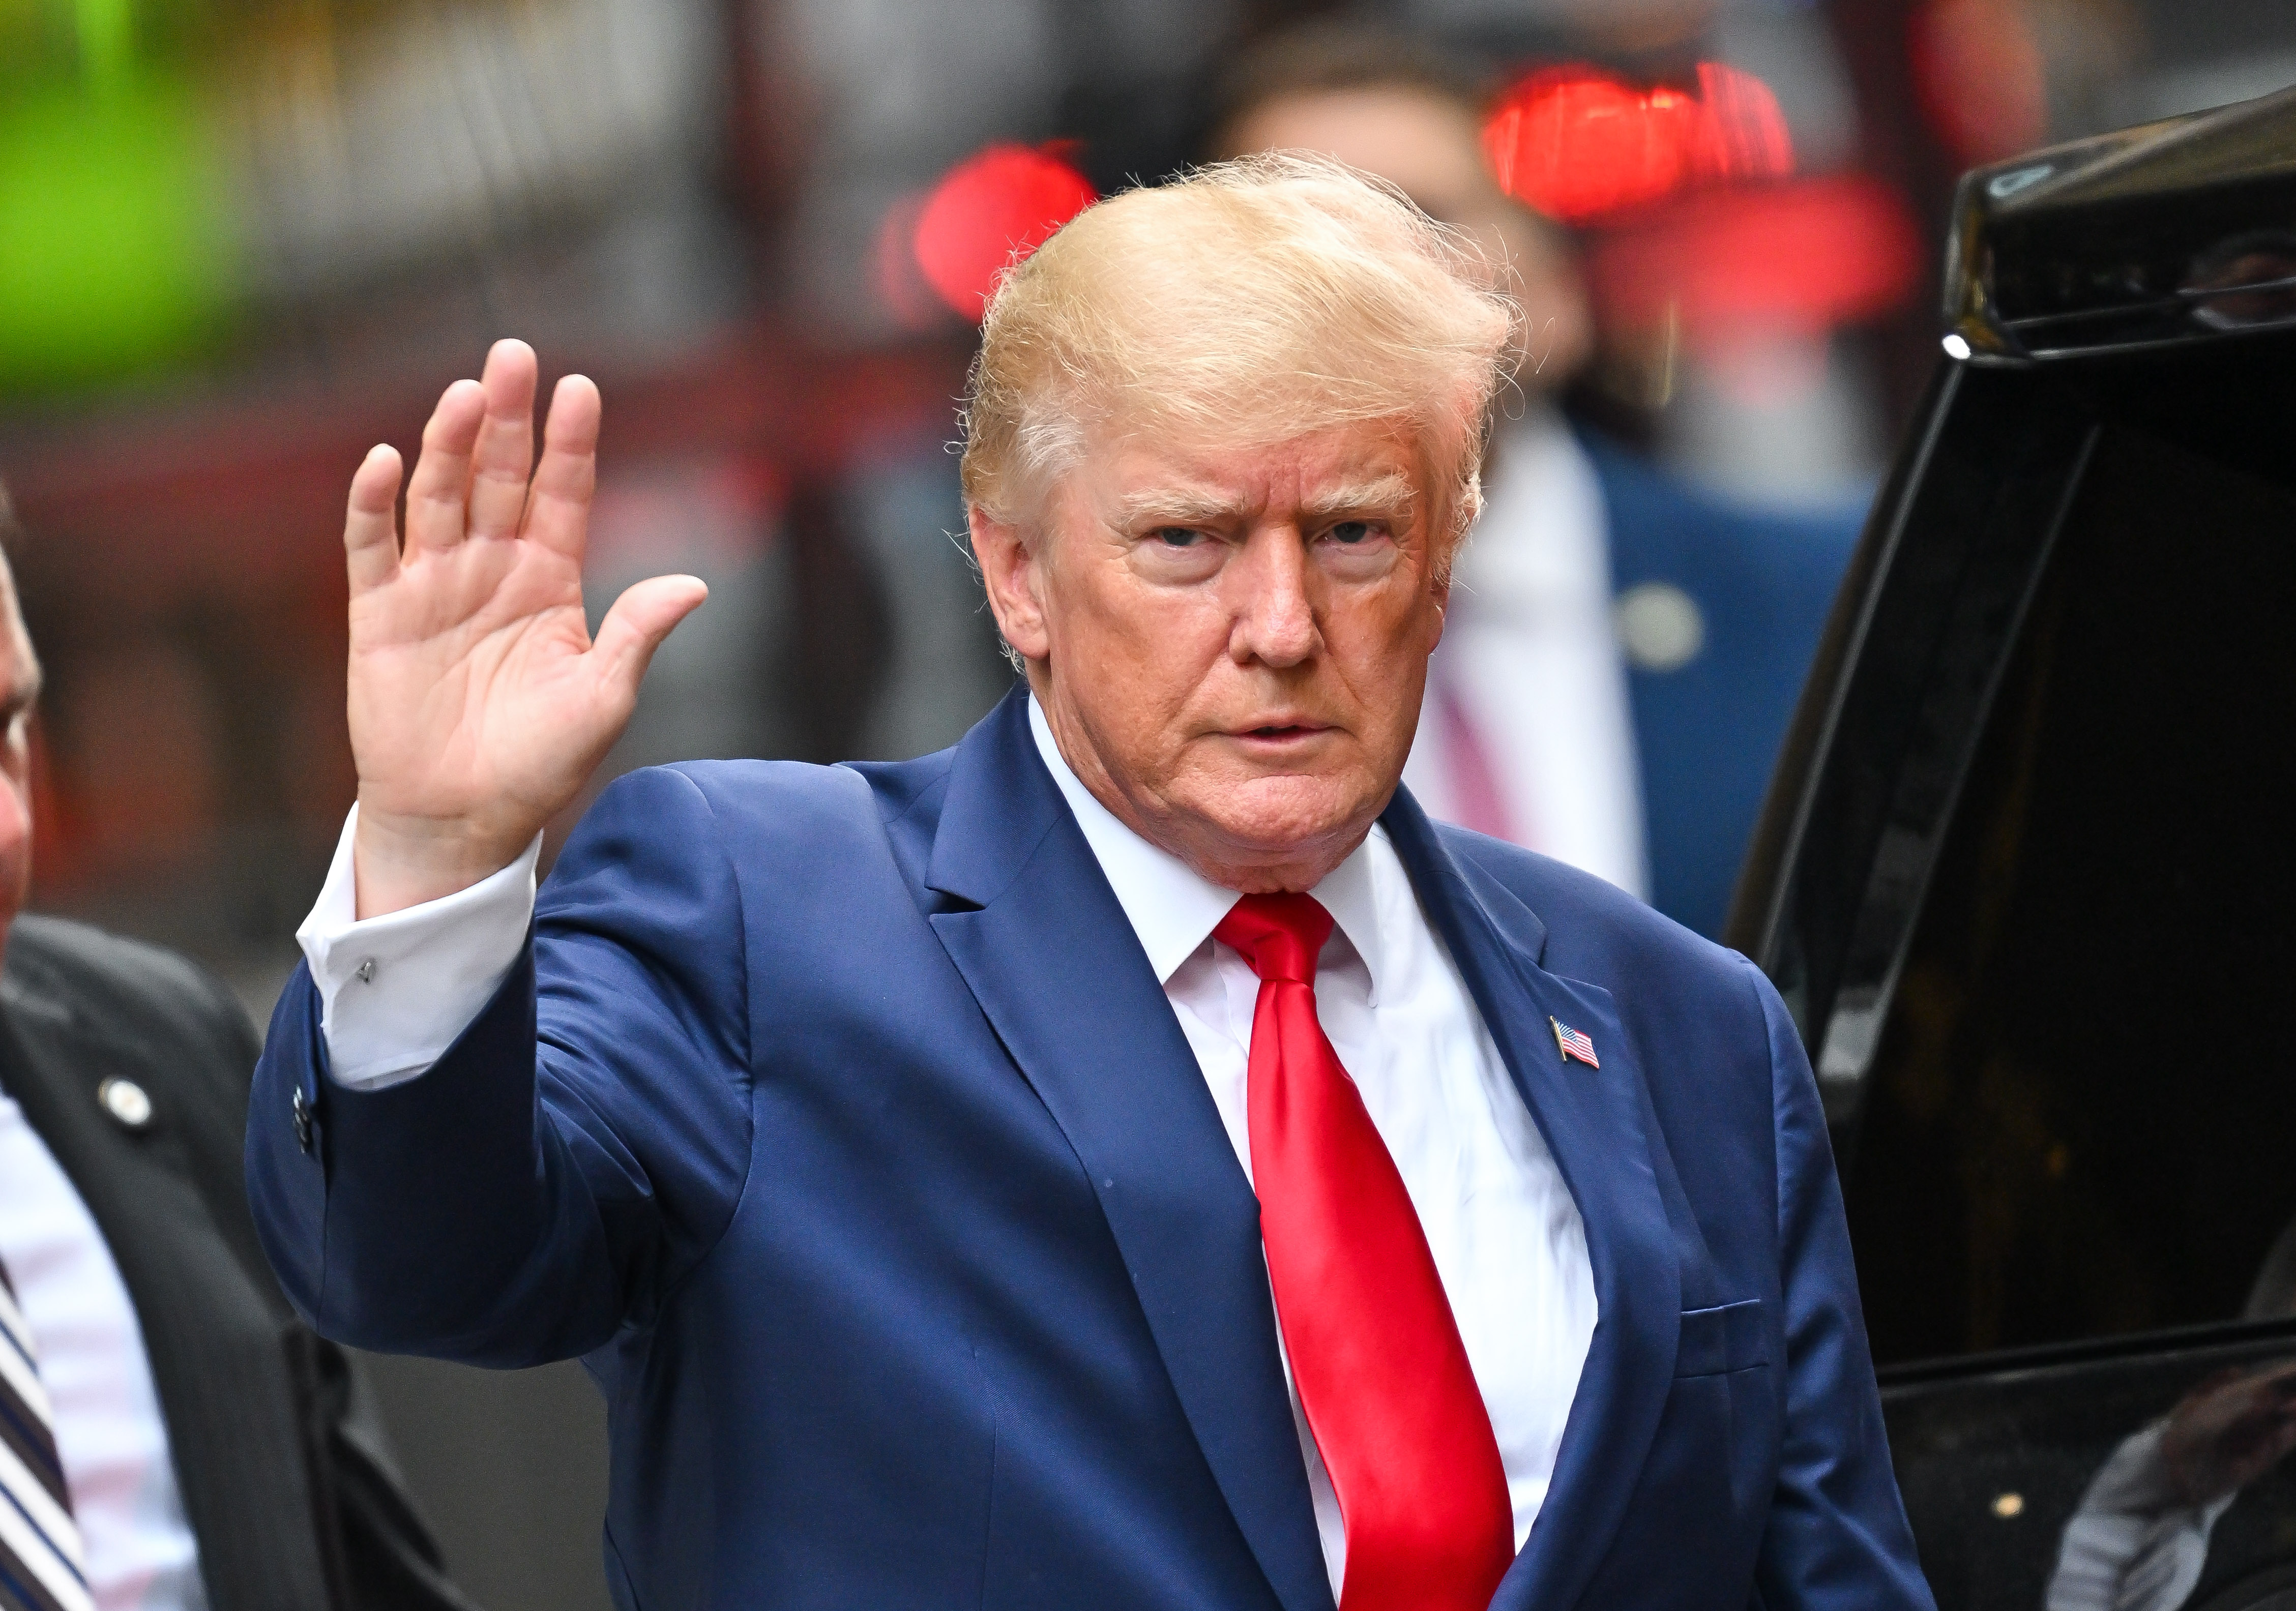 Donald Trump is pictured in a navy business suit with red tie. He is waving his right hand while looking into the camera.